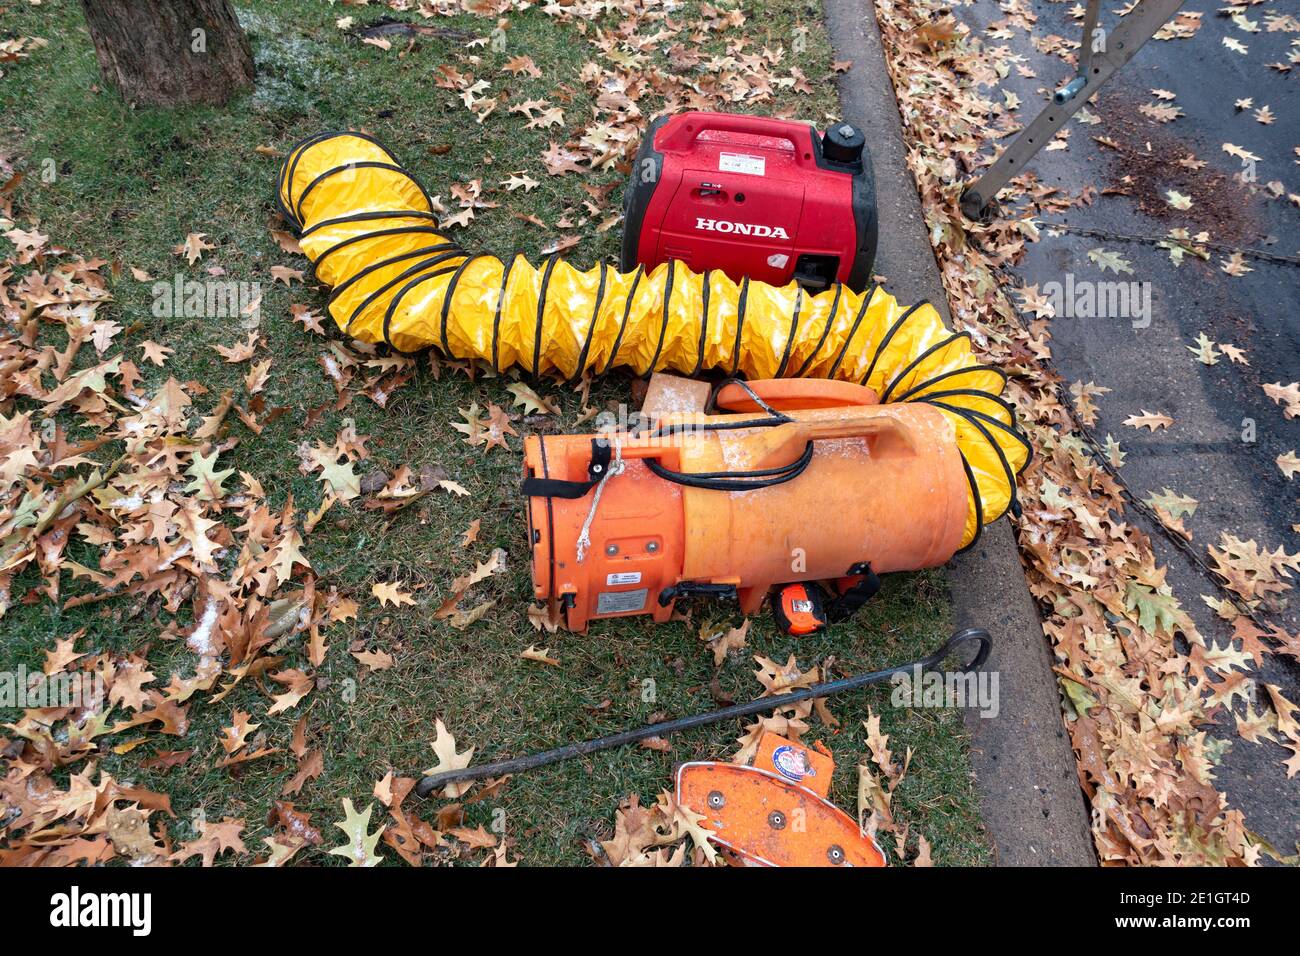 Parts of a car vacuum cleaner or a large yellow caterpillar escaped from the nature center. St Paul Minnesota MN USA Stock Photo